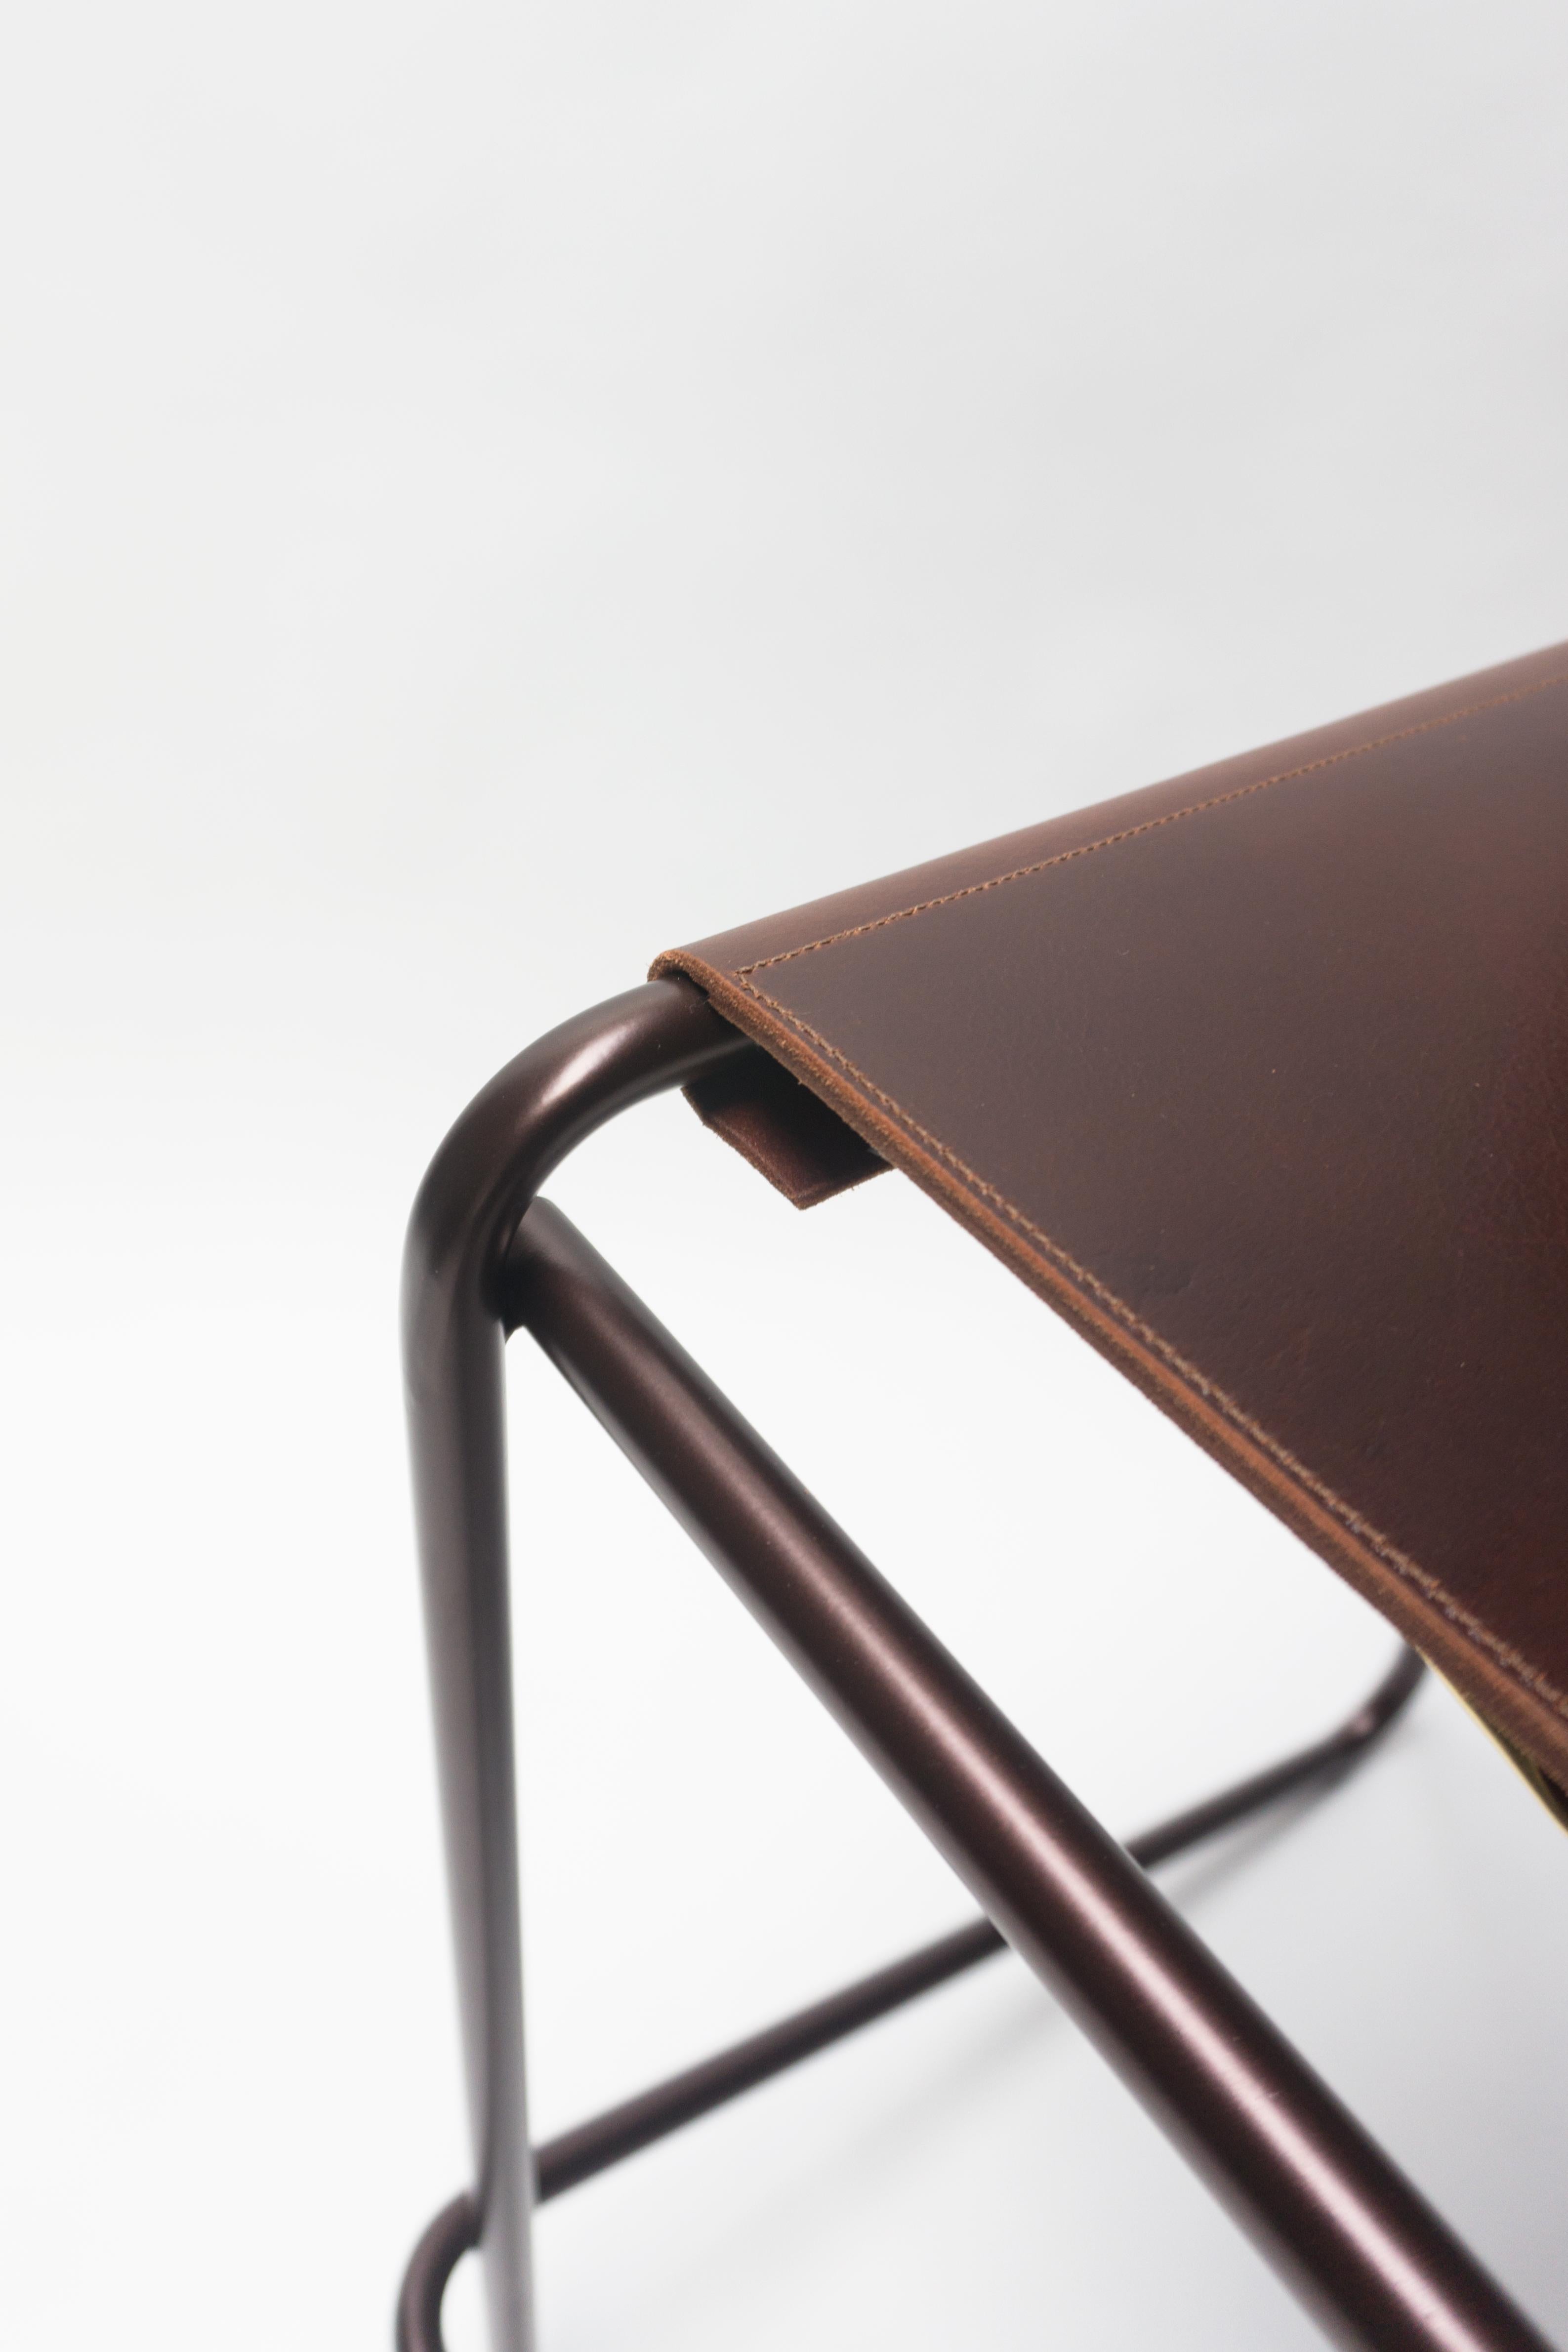 The Flora bar stool is composed of just three pieces of steel: an L-shaped back piece that touches the floor and rises up again at an angle to create a footrest, a rectilinear seat and front support, and a simple, stabilizing cross-bar across the